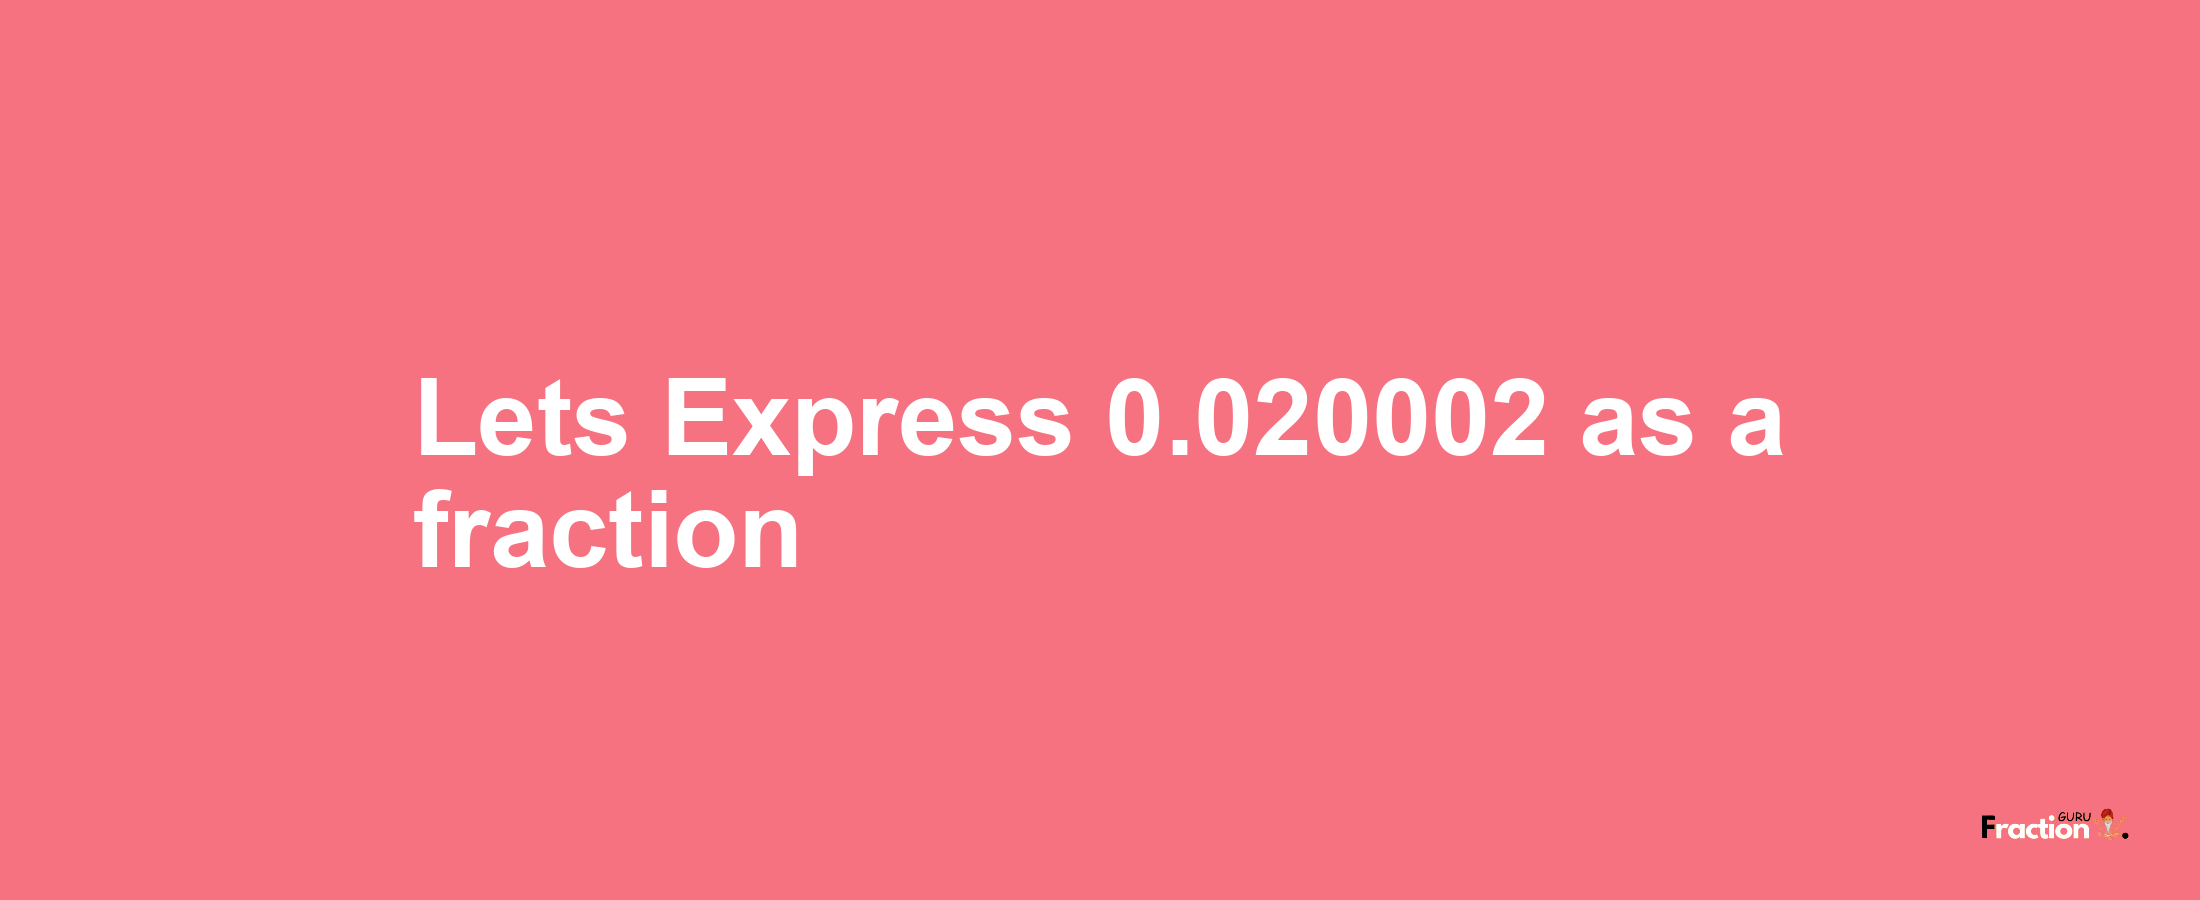 Lets Express 0.020002 as afraction